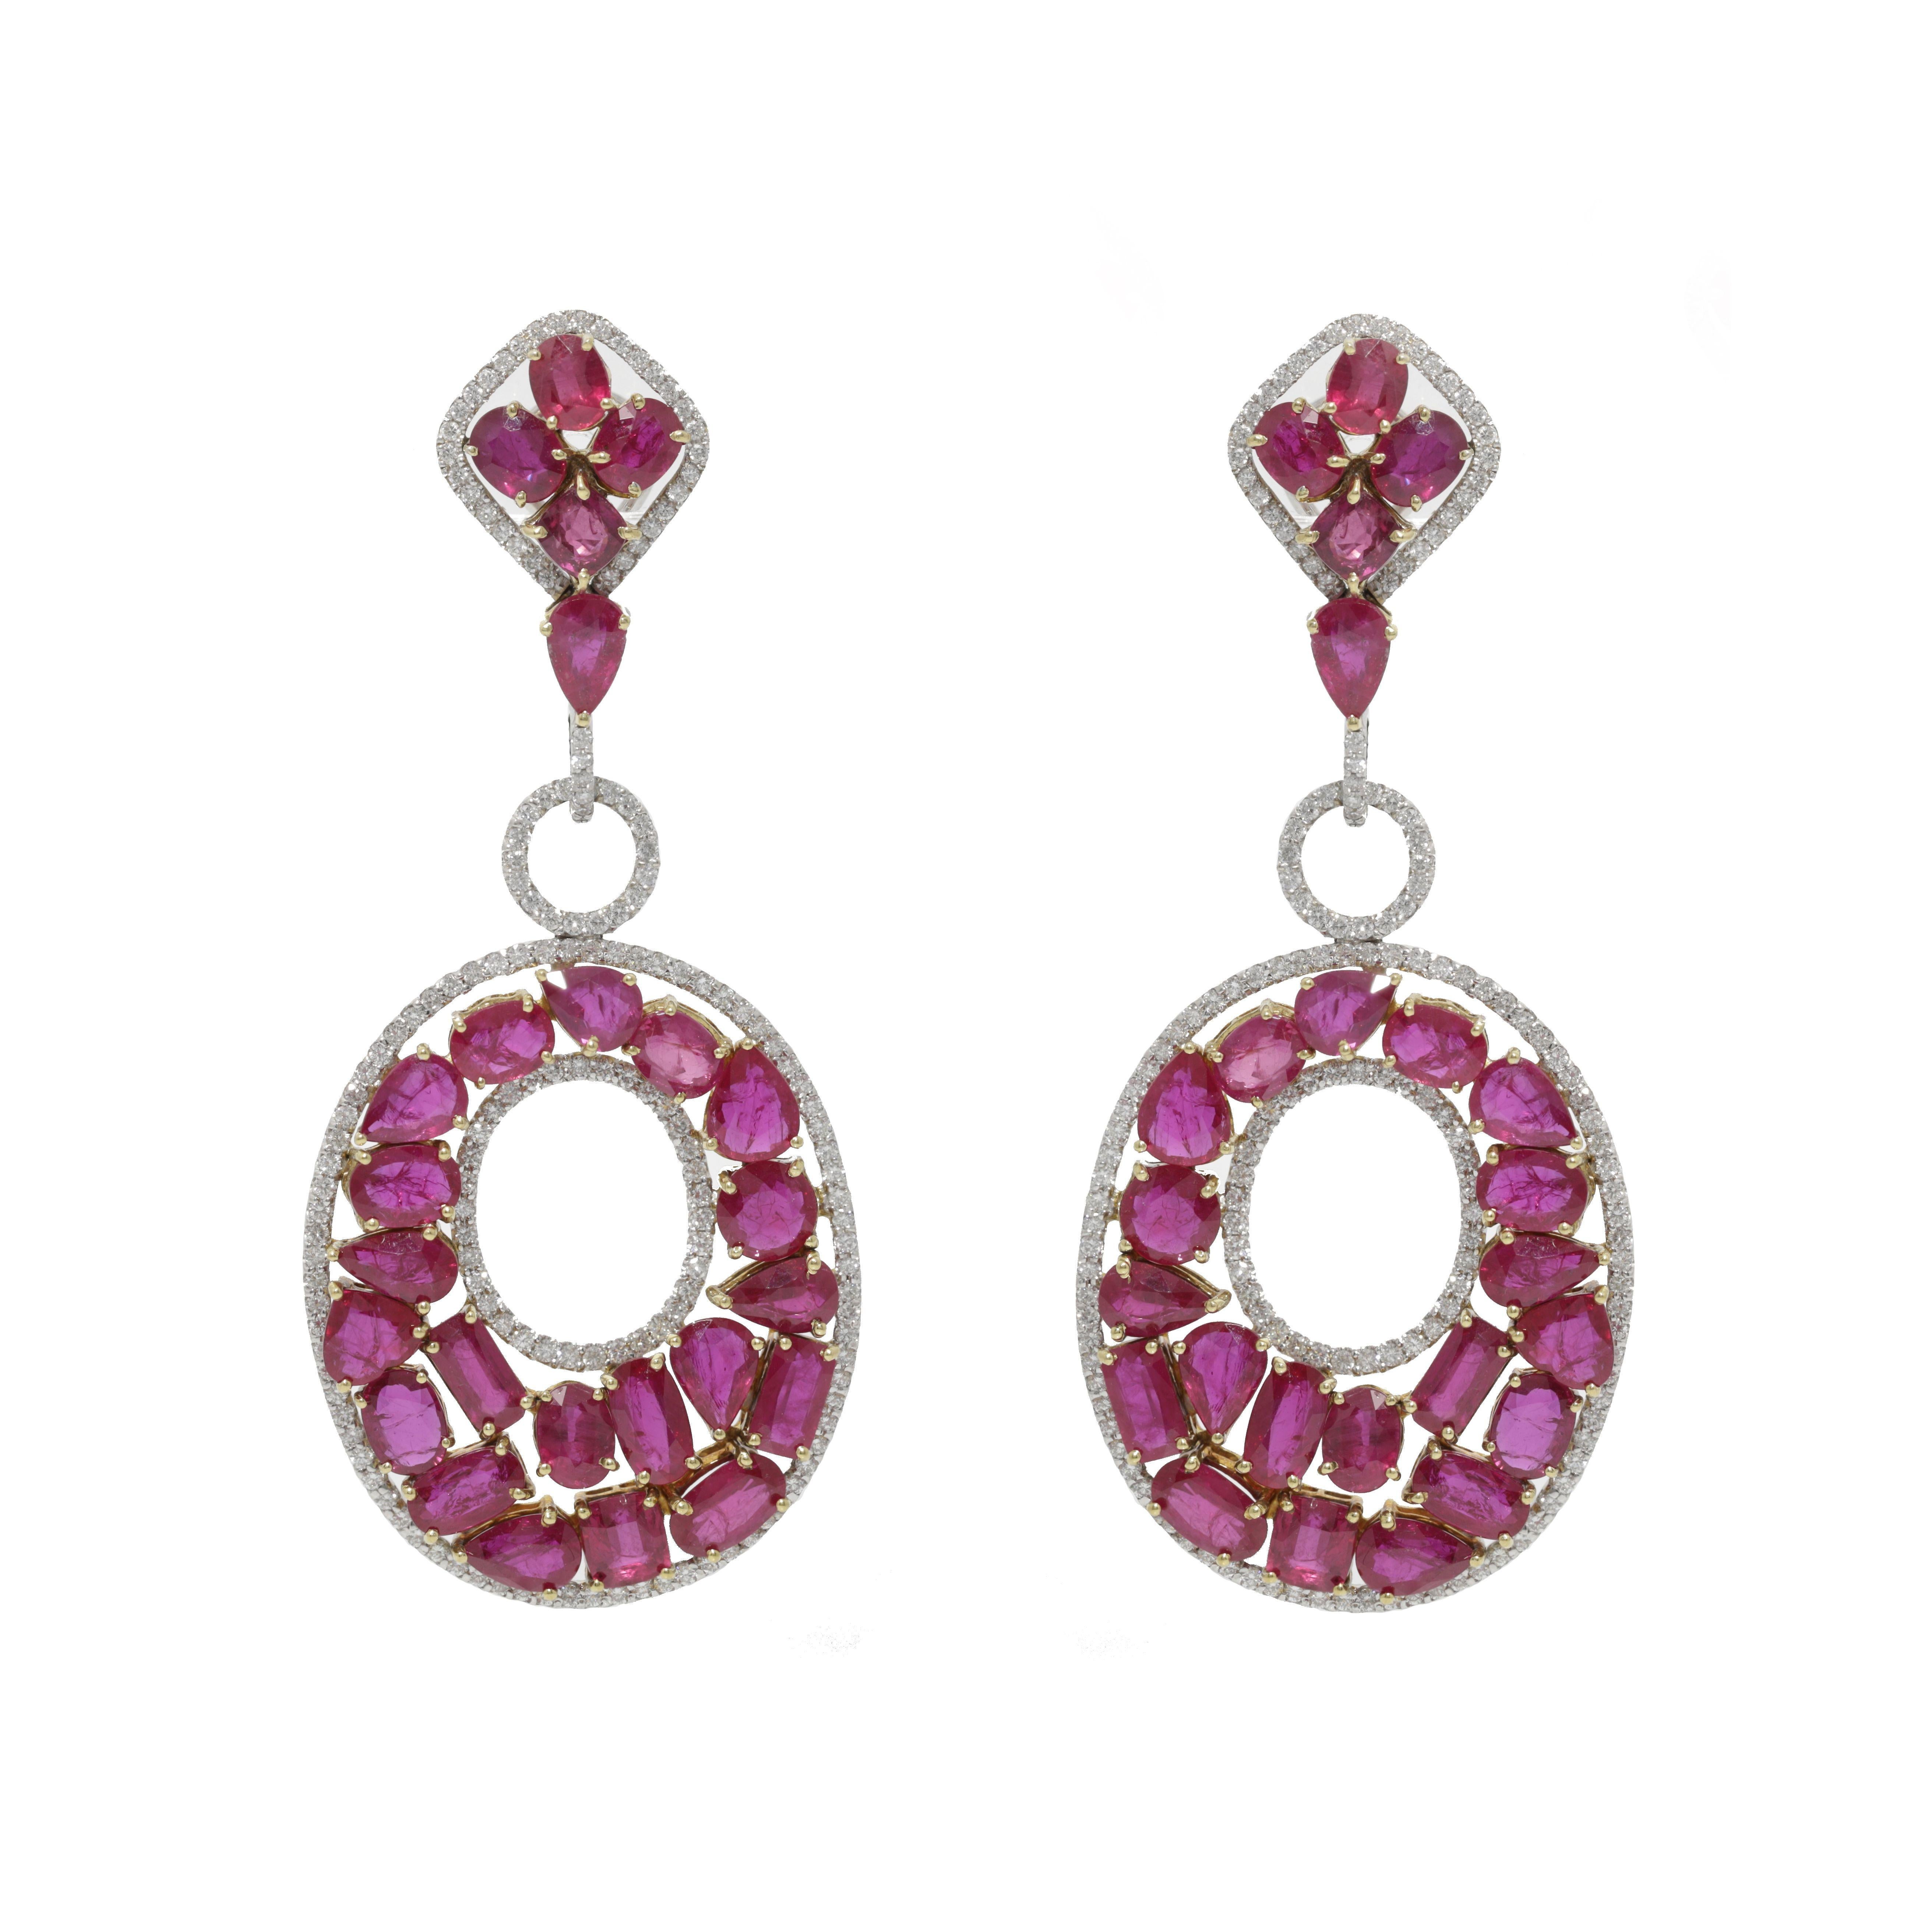 Diana M. 53.20 Carat Ruby and Diamond Earrings In New Condition For Sale In New York, NY